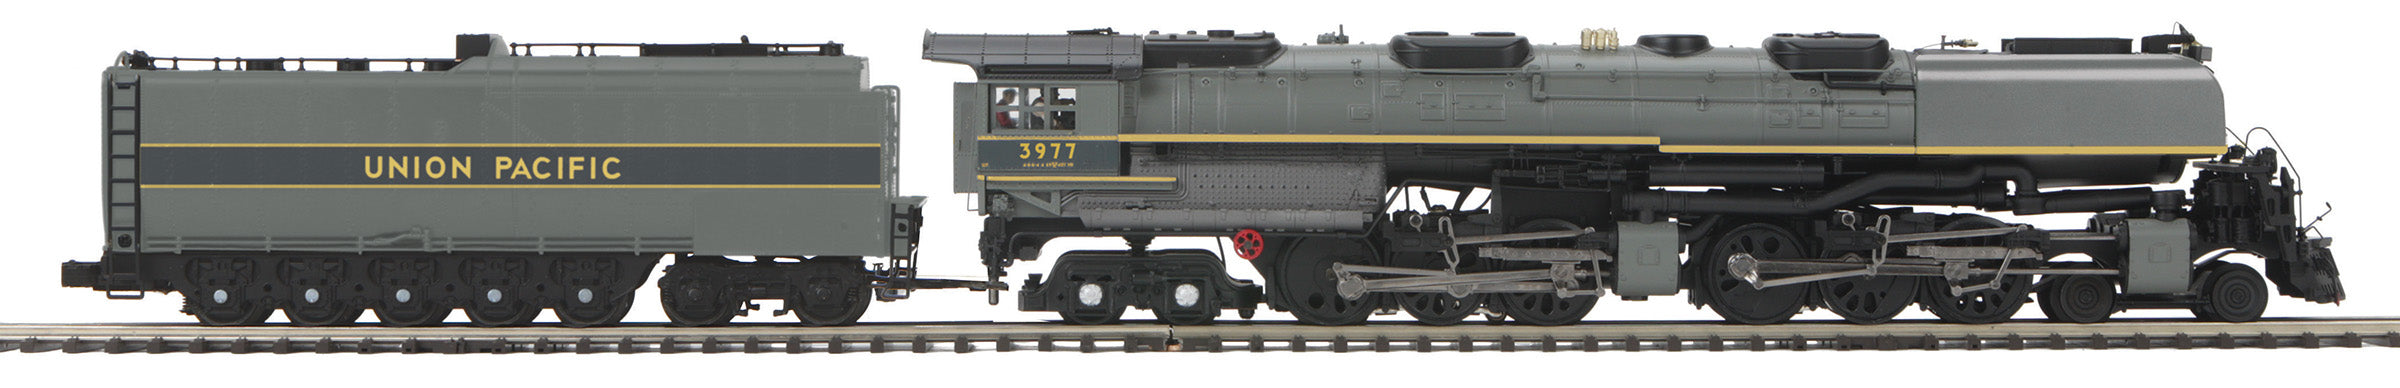 MTH 20-3897-1 - 4-6-6-4 Challenger Steam Engine "Union Pacific" #3977 w/ PS3 + Smoke Deflectors (Two-Tone Gray w/ Yellow Stripes - Oil Tender)